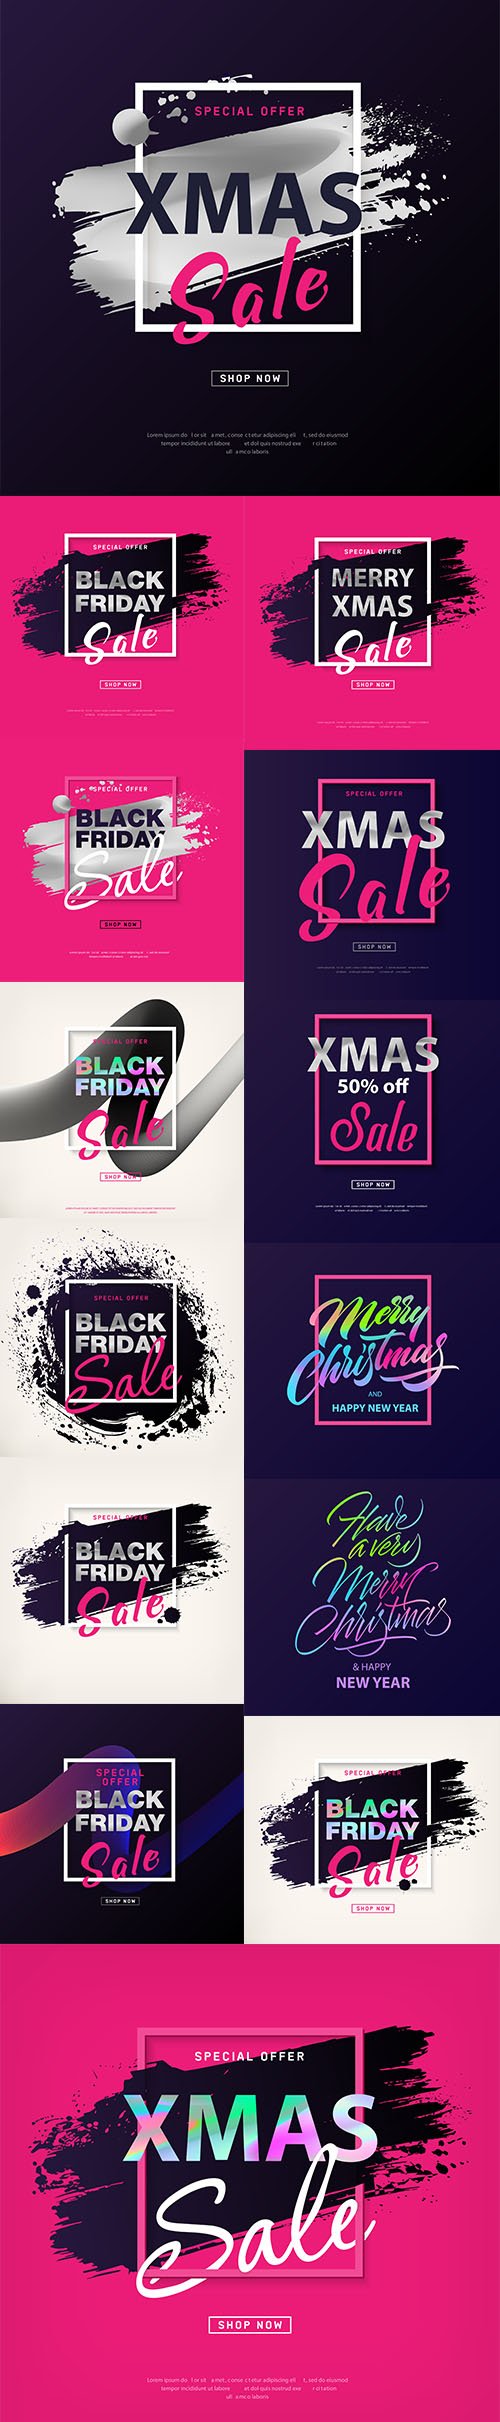 Merry christmas sale poster and black friday sale poster with silver text